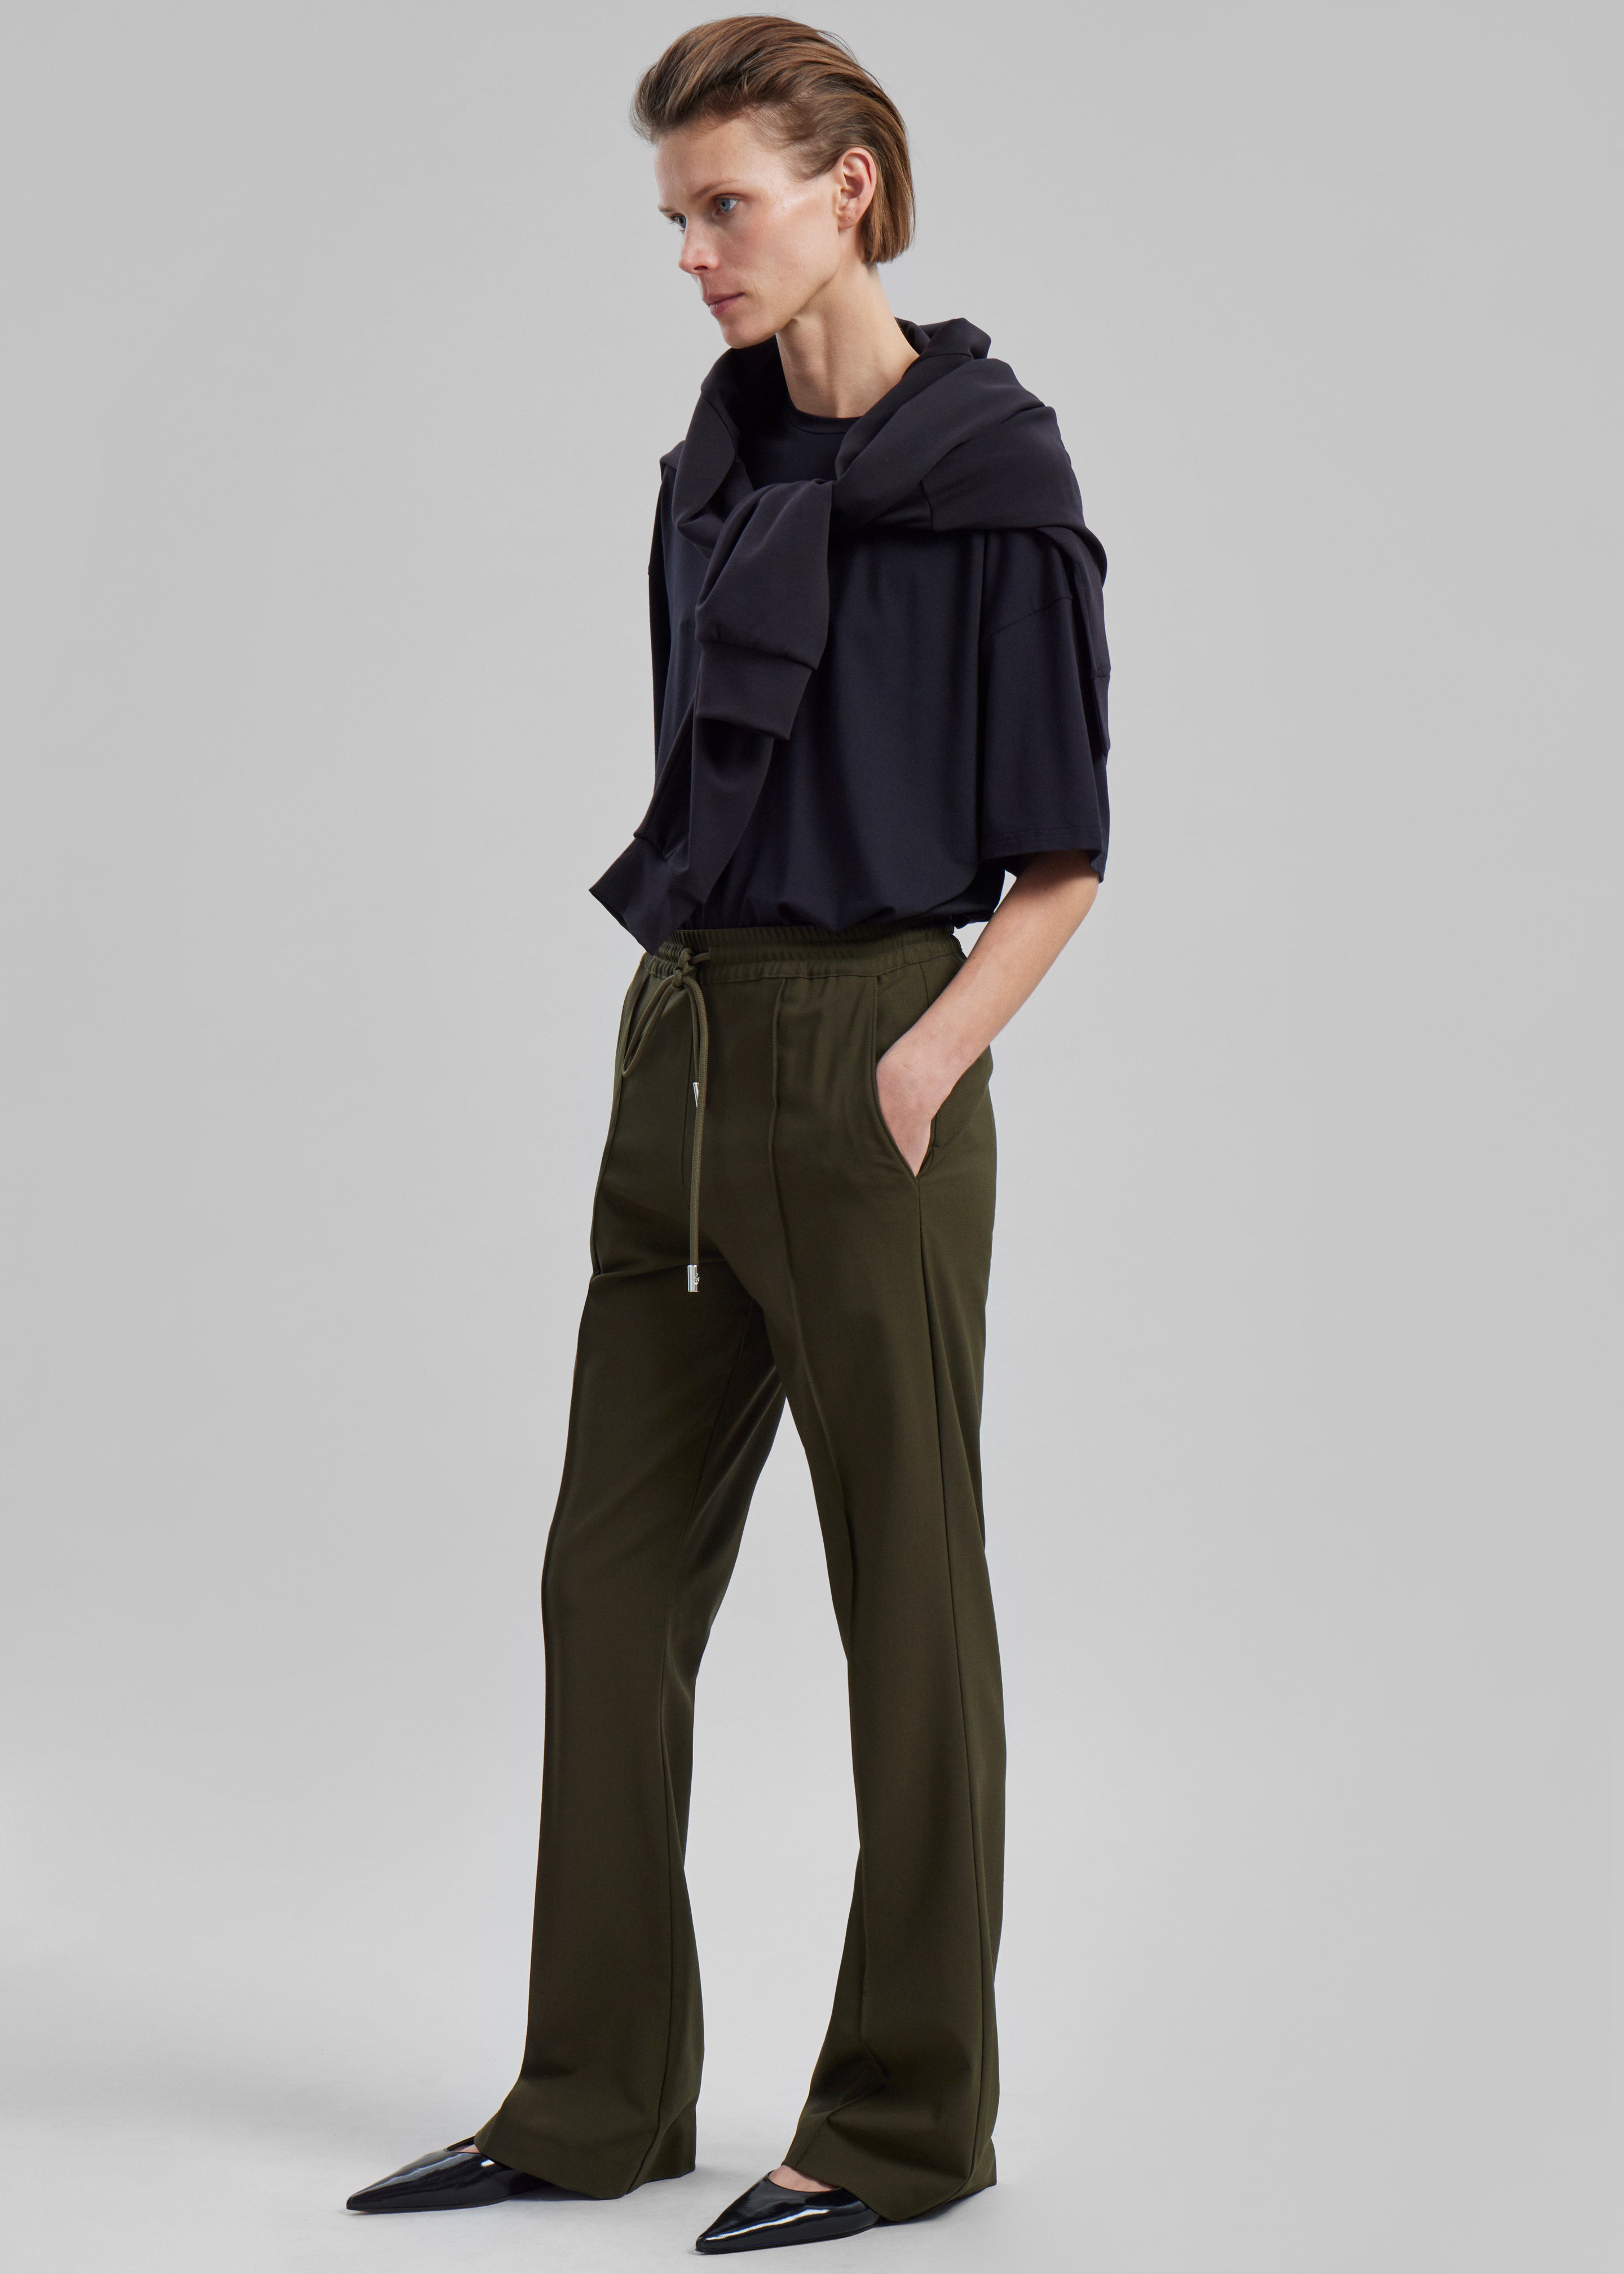 JW Anderson Drawstring Waist Tailored Trousers - Olive - 6